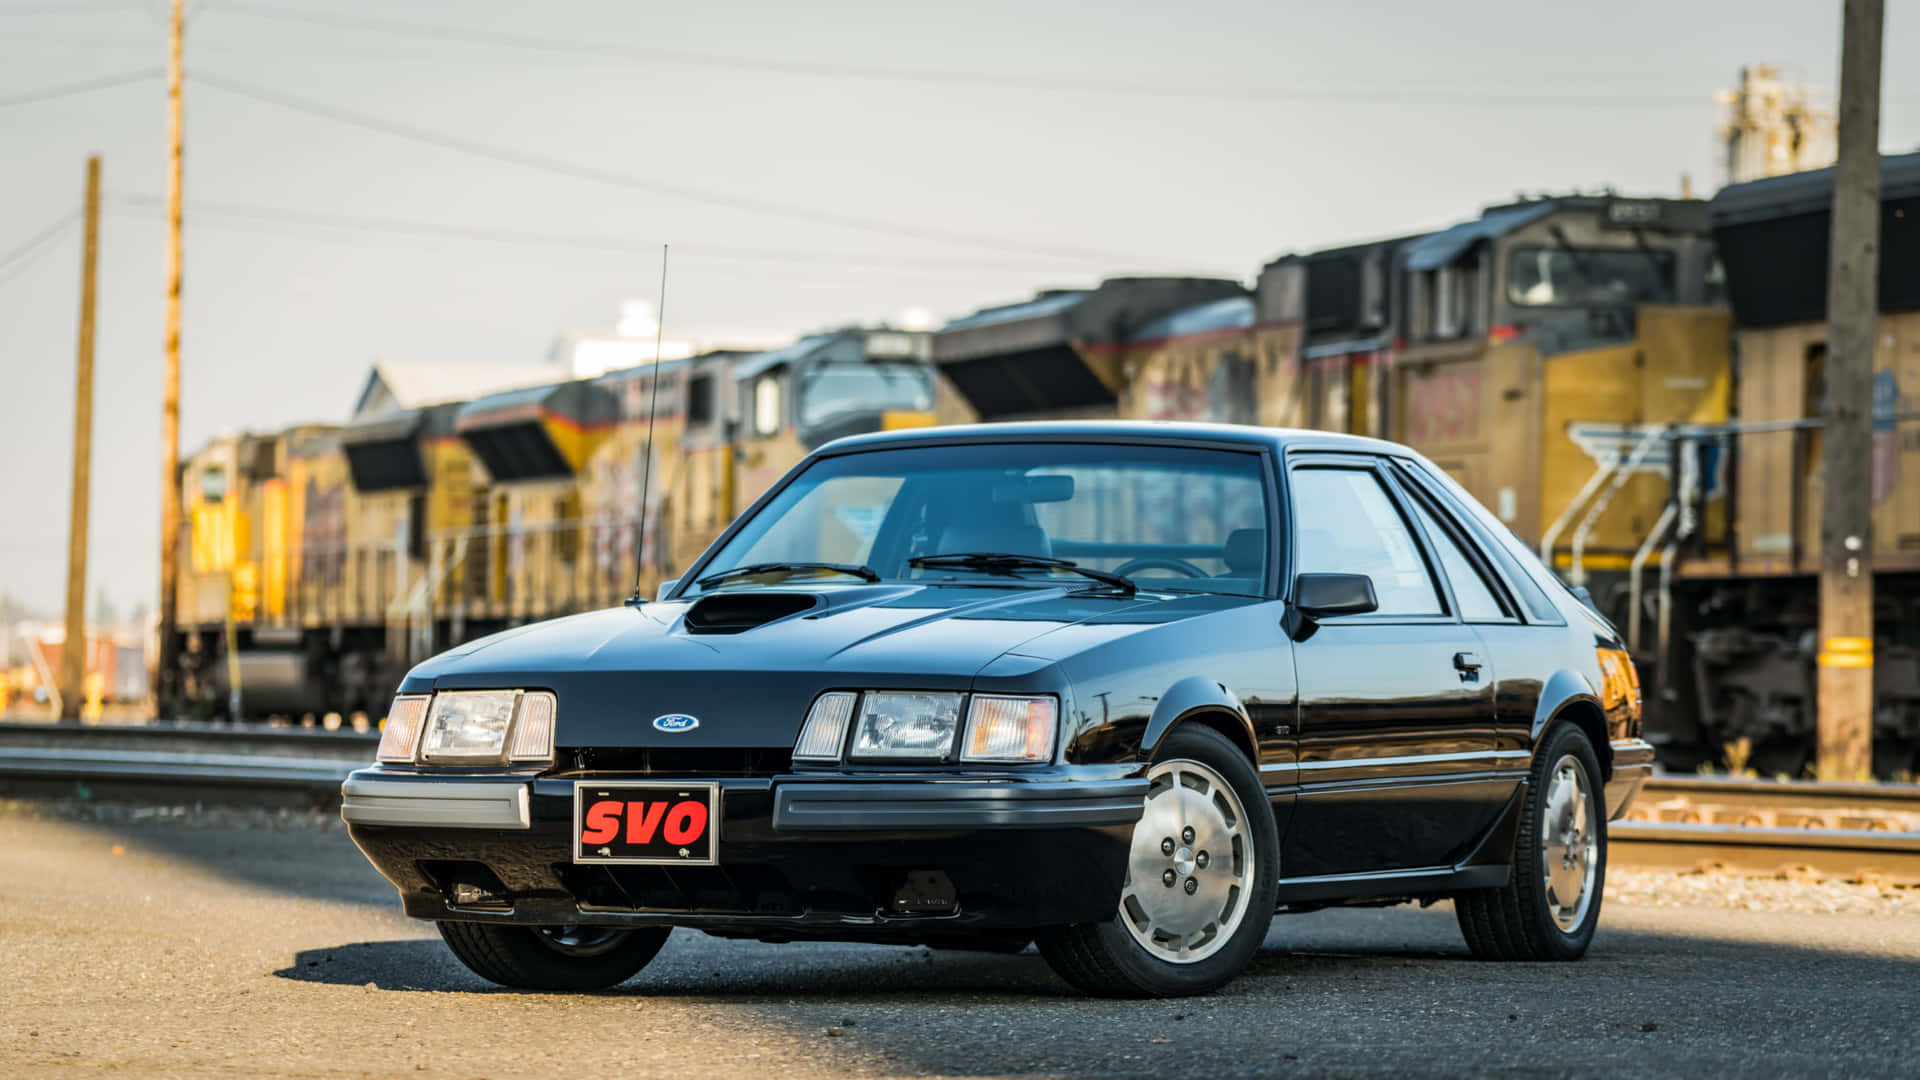 The Marvelous Ford Mustang Svo In Superb Condition Wallpaper